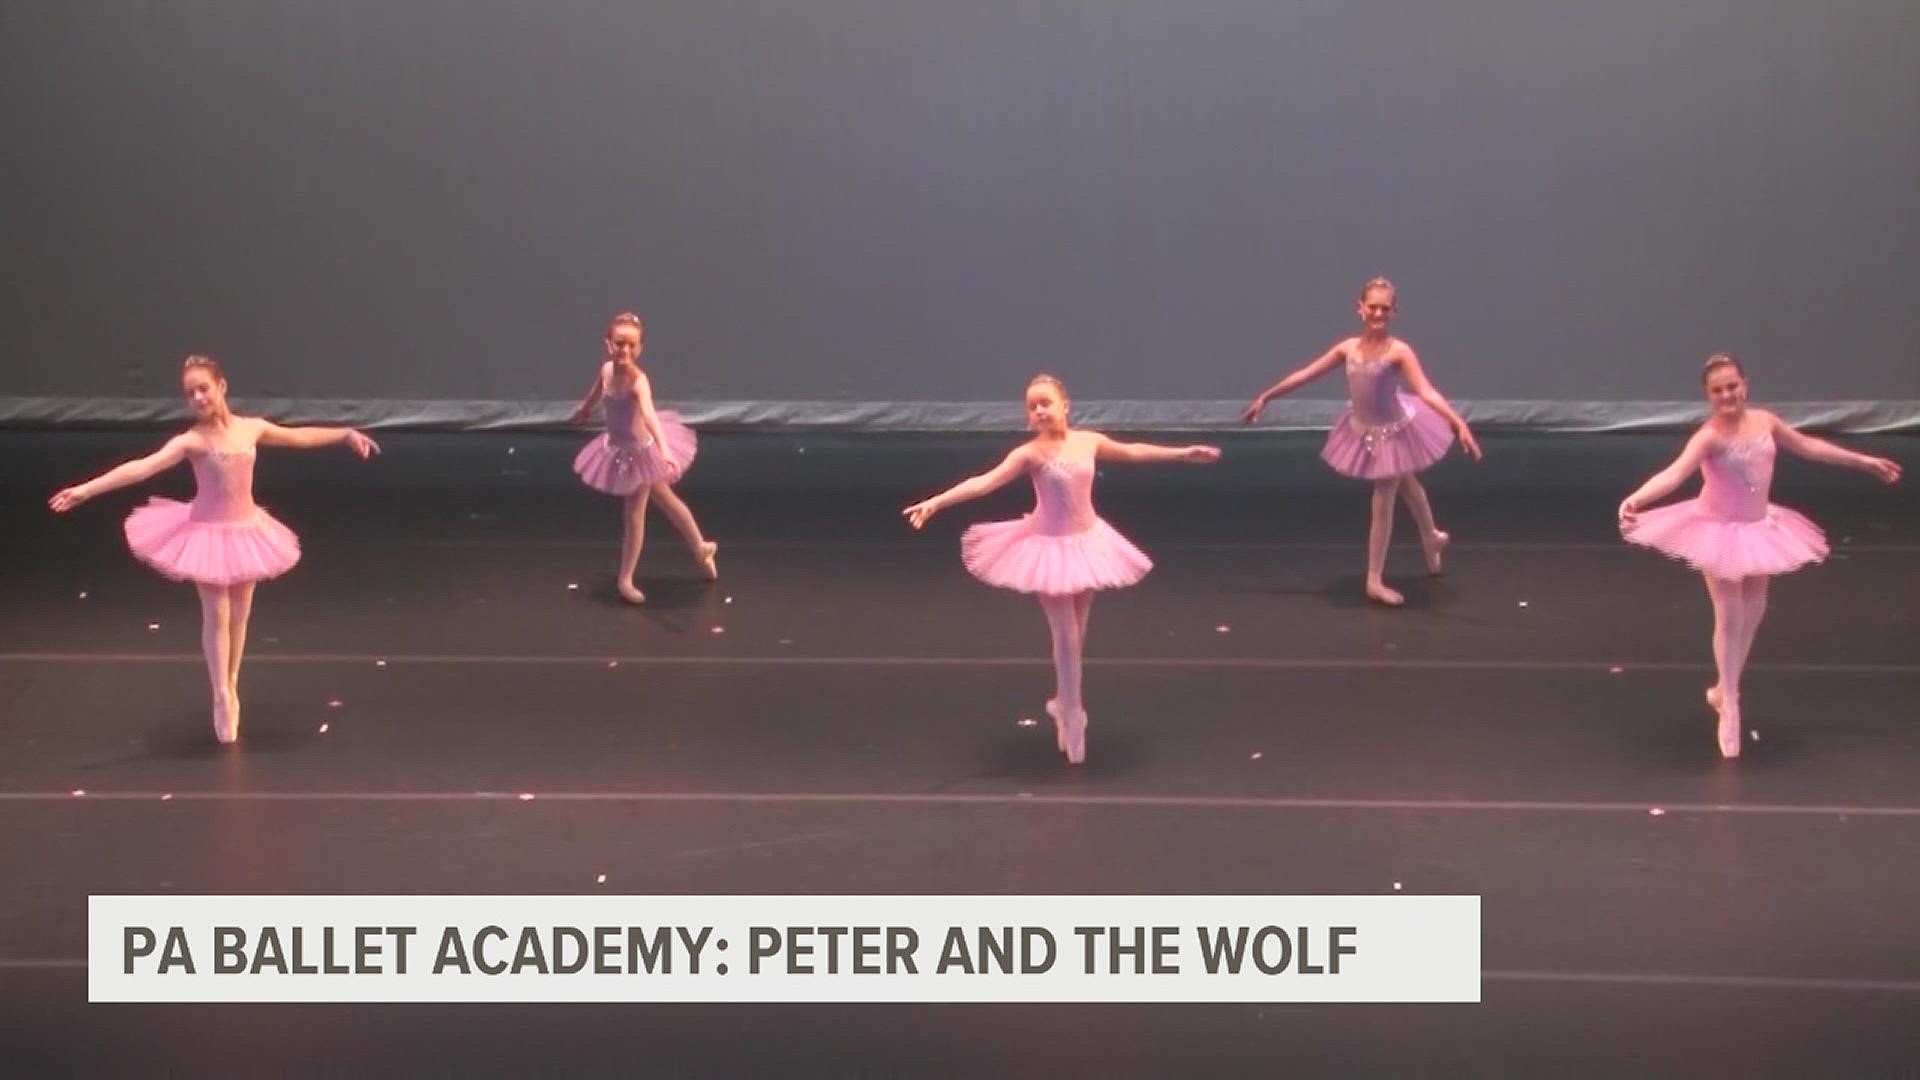 Davit Karapetyan, one of the artistic directors of the Pennsylvania Ballet Academy, joined FOX43 on June 1 to discuss the show.